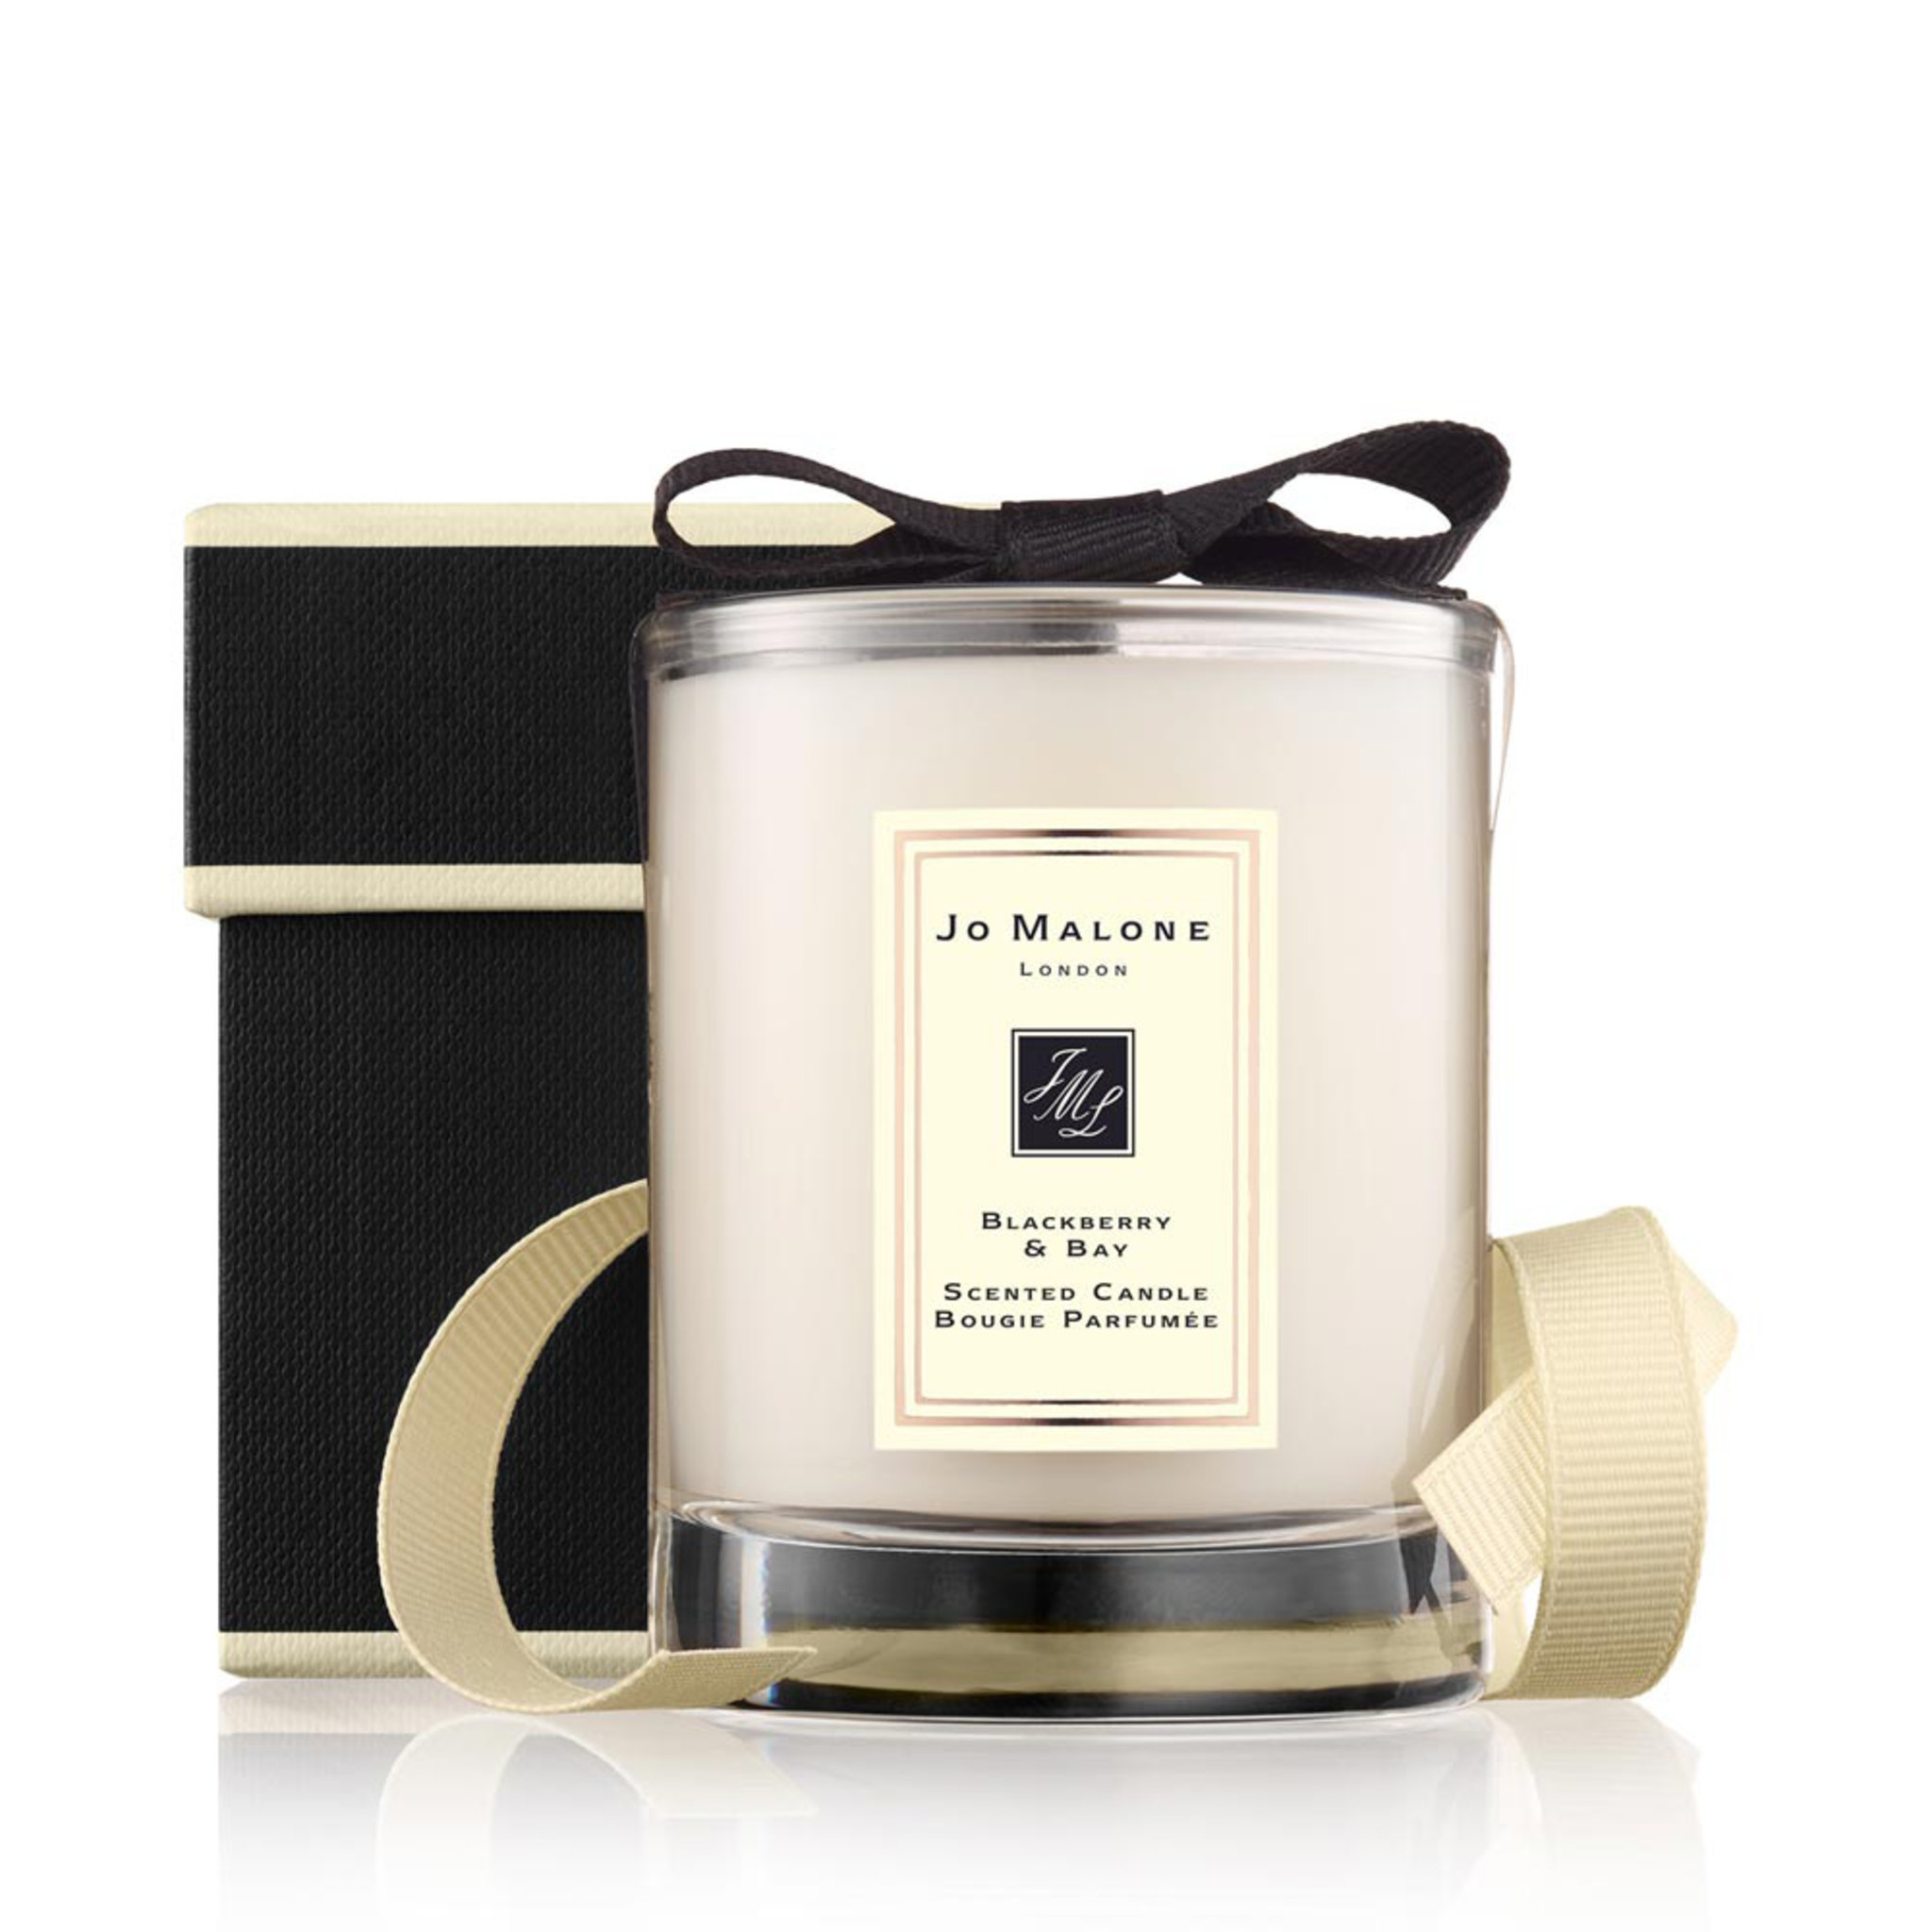 Blackberry & Bay Travel Candle, 60 G